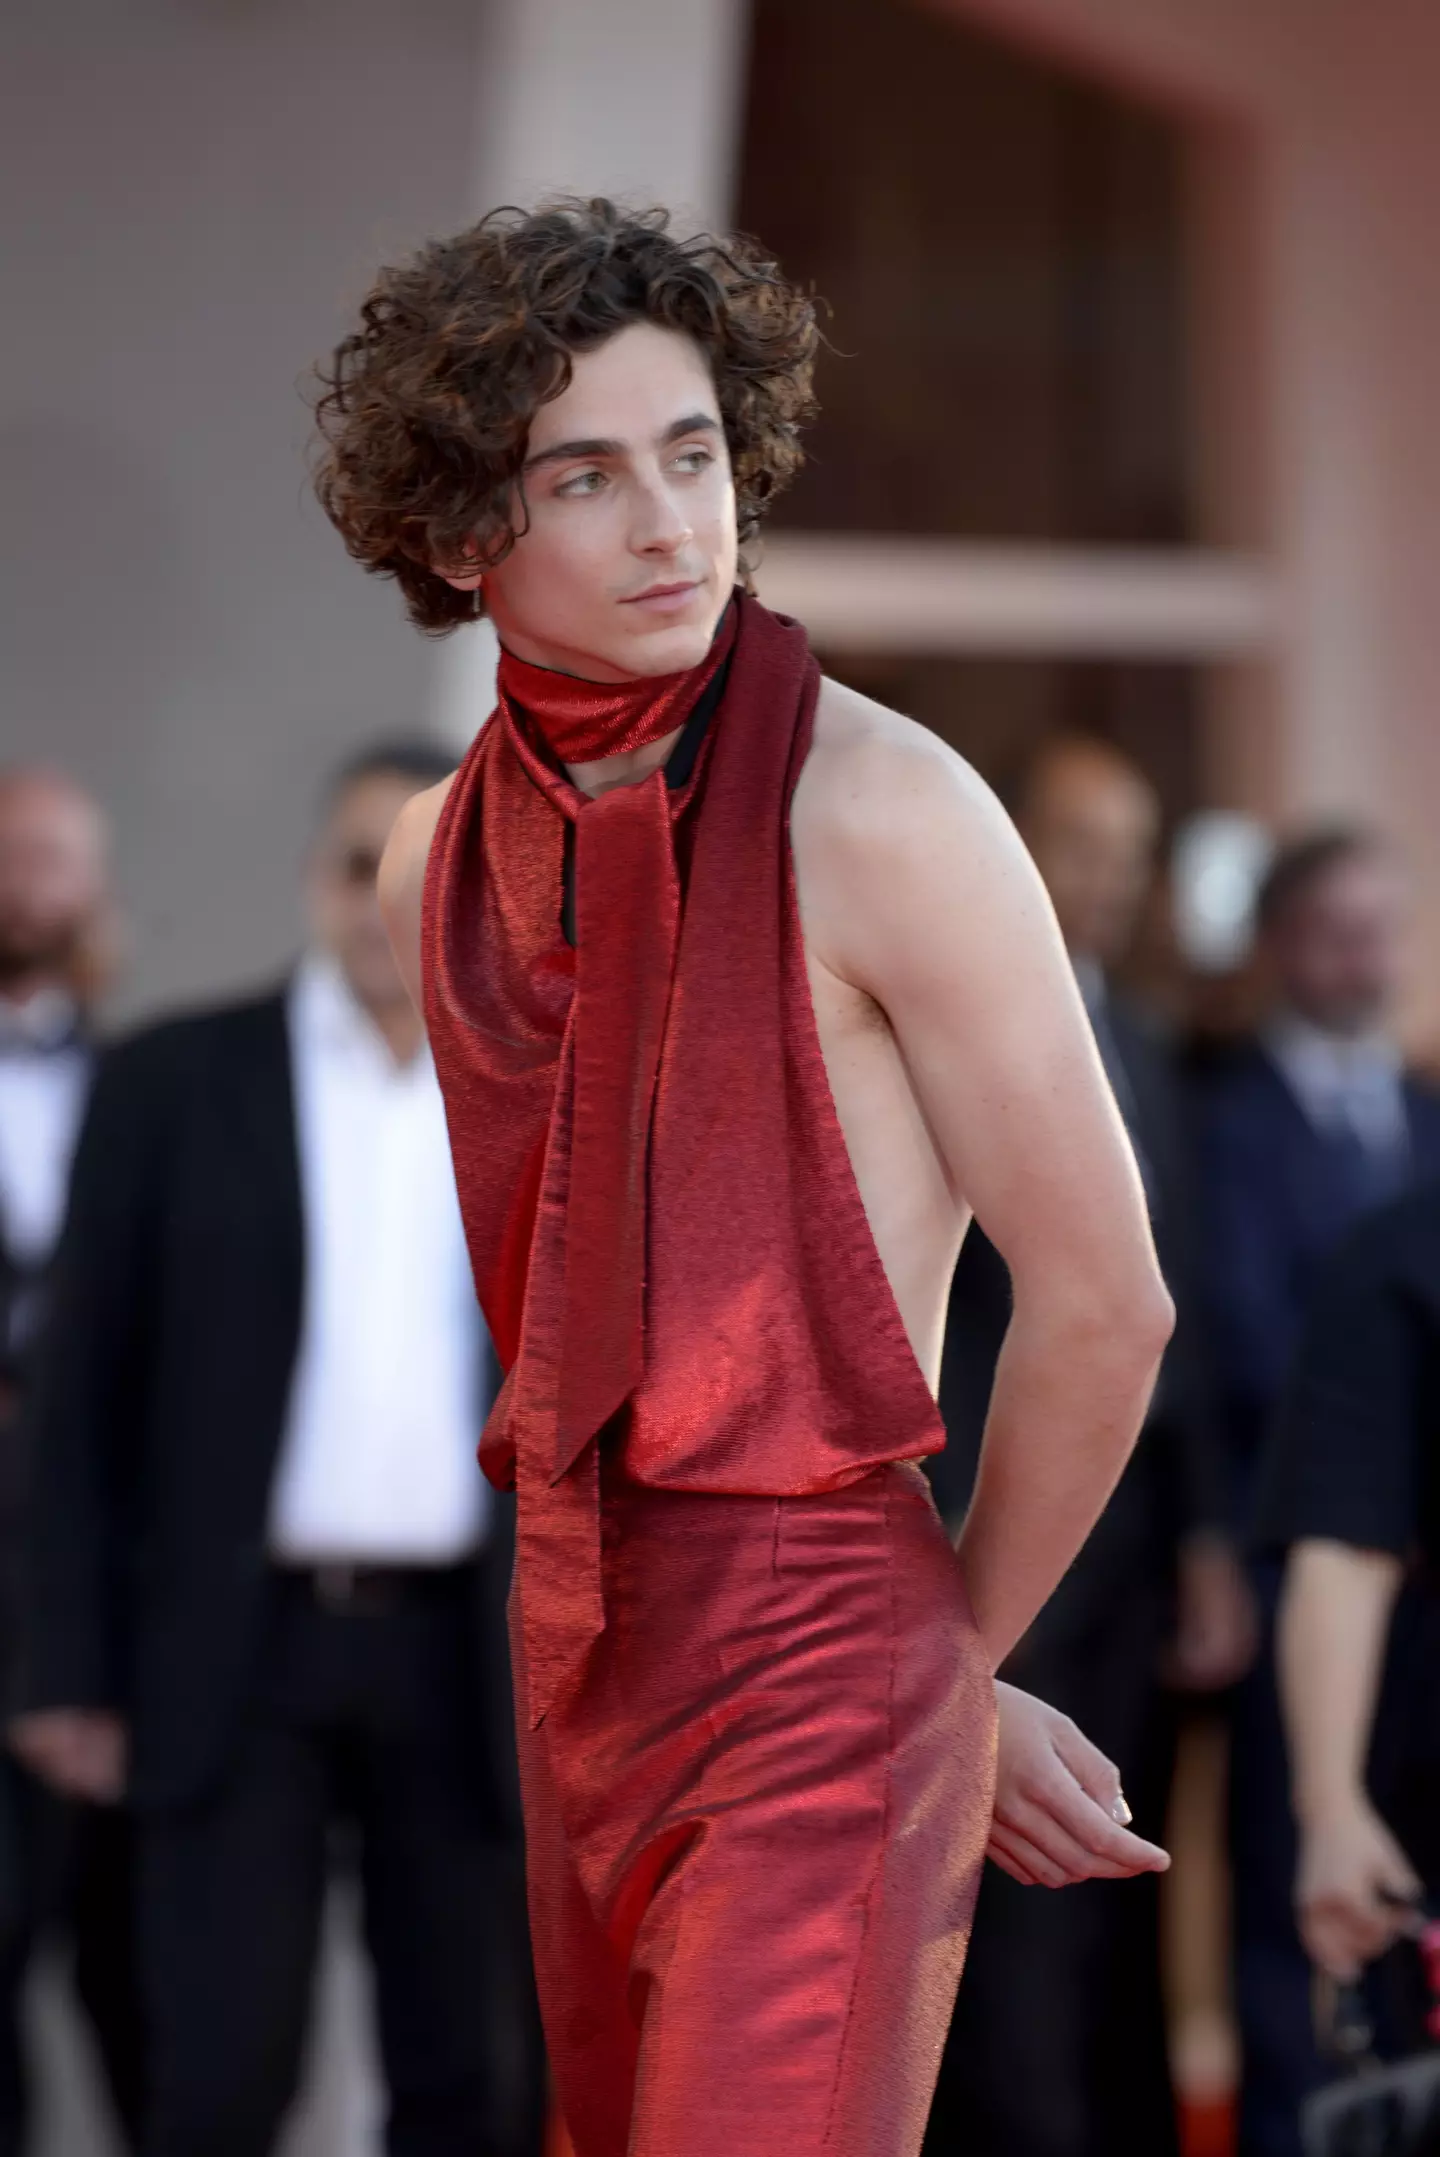 Chalamet wore a custom outfit by Haider Ackermann.